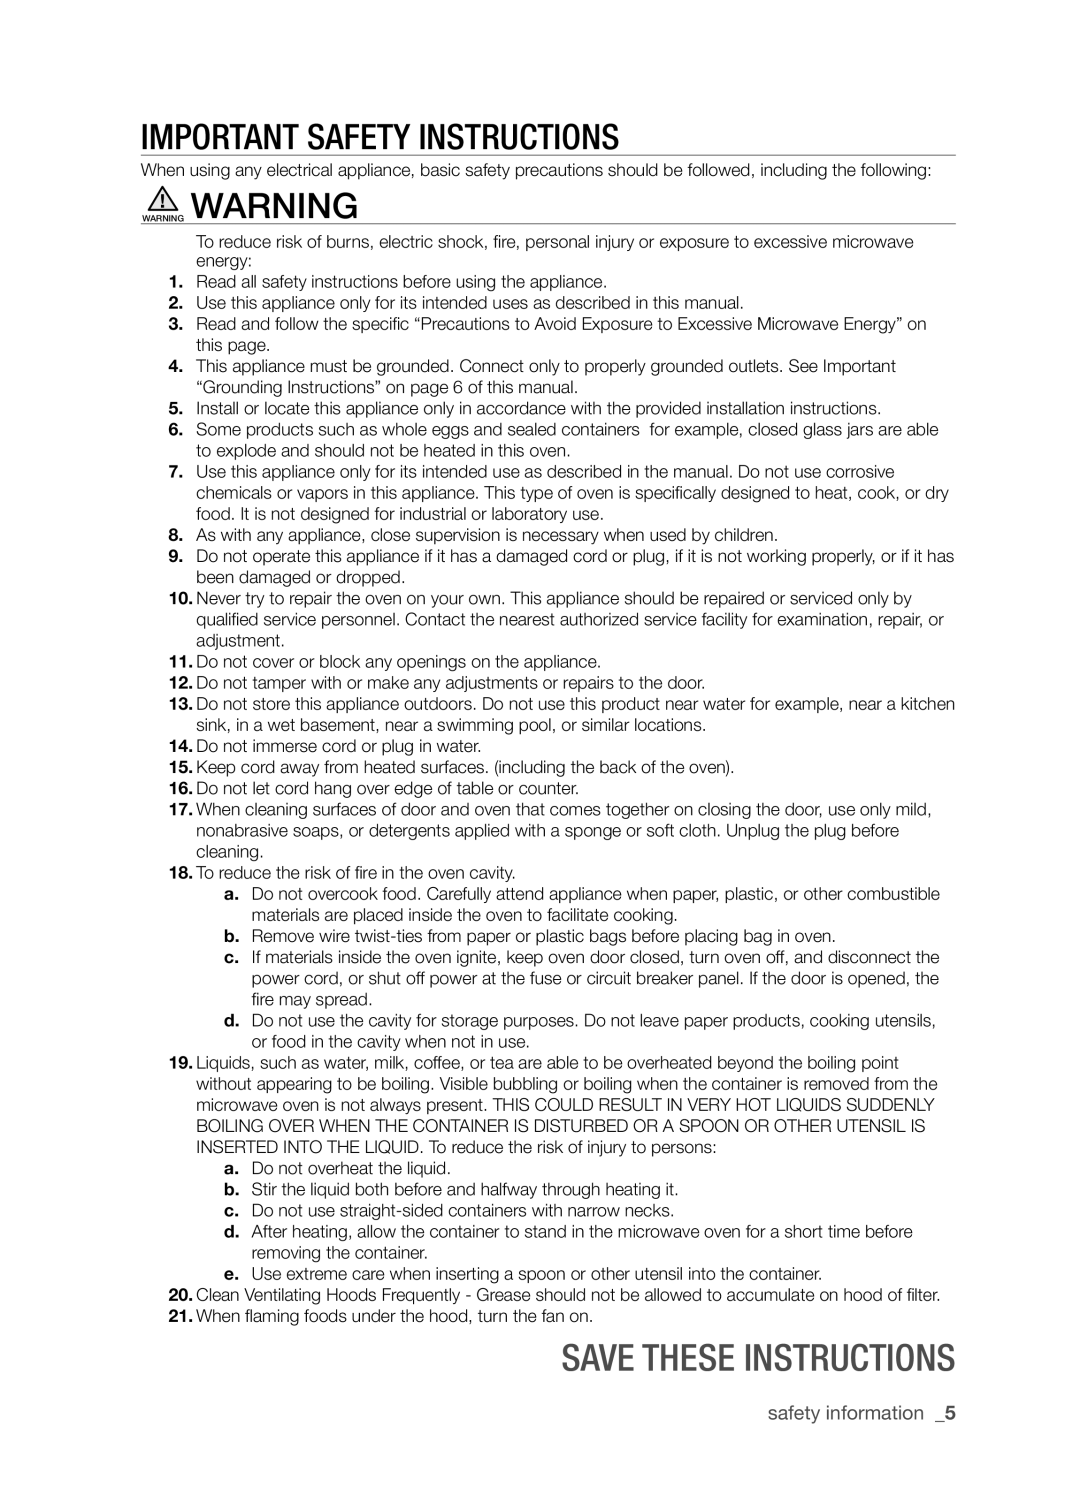 Samsung SMK9175ST user manual Important Safety Instructions, Save these instructions, safety information 